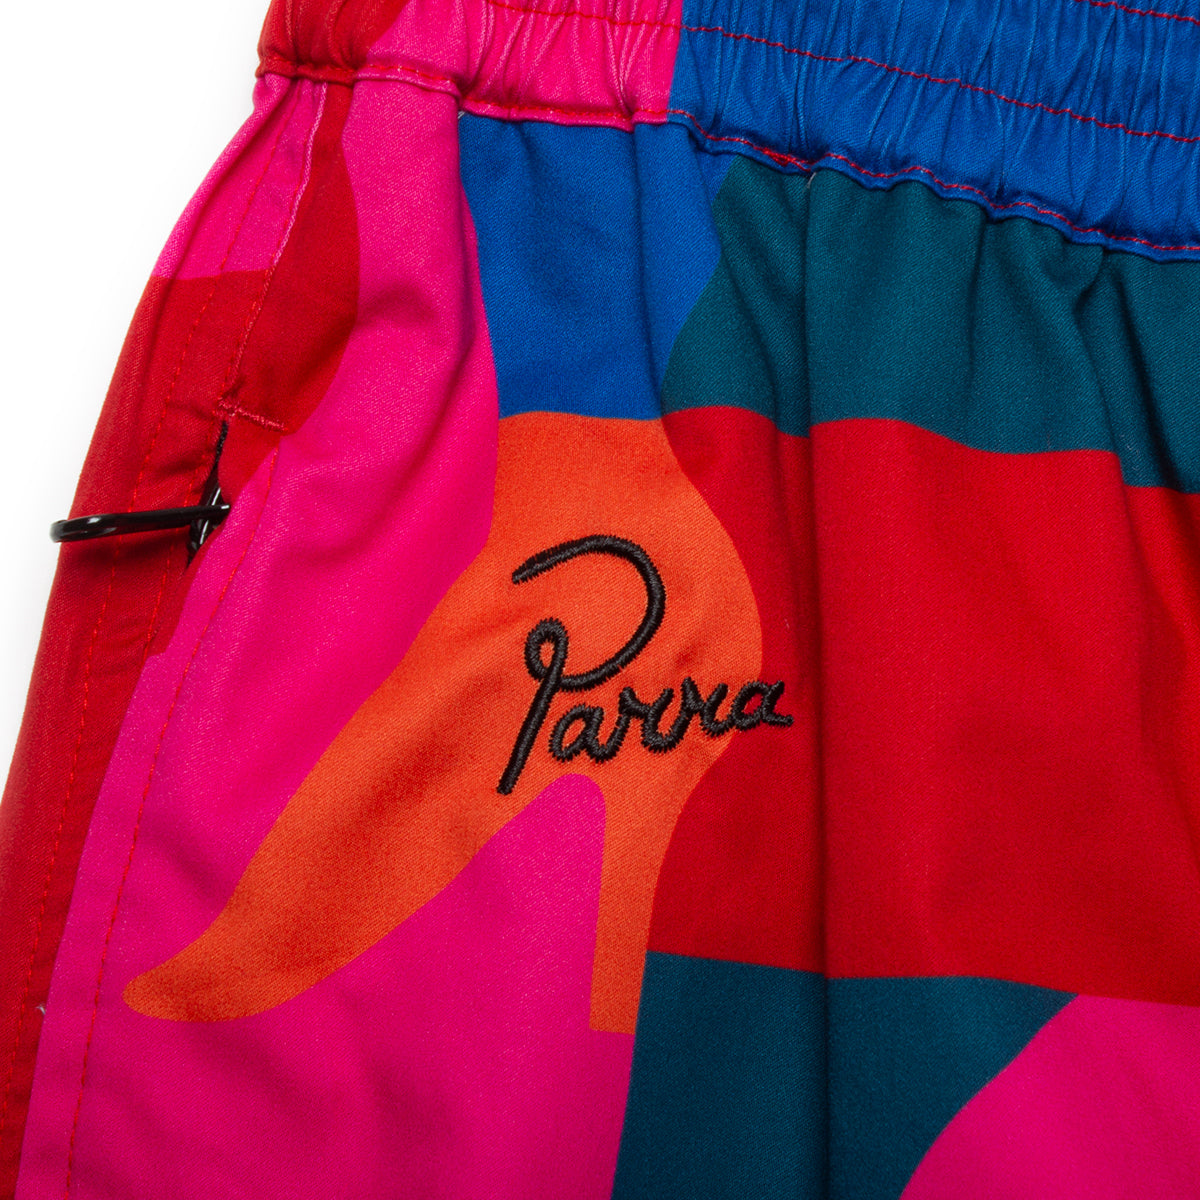 by Parra Sitting Pear Pants